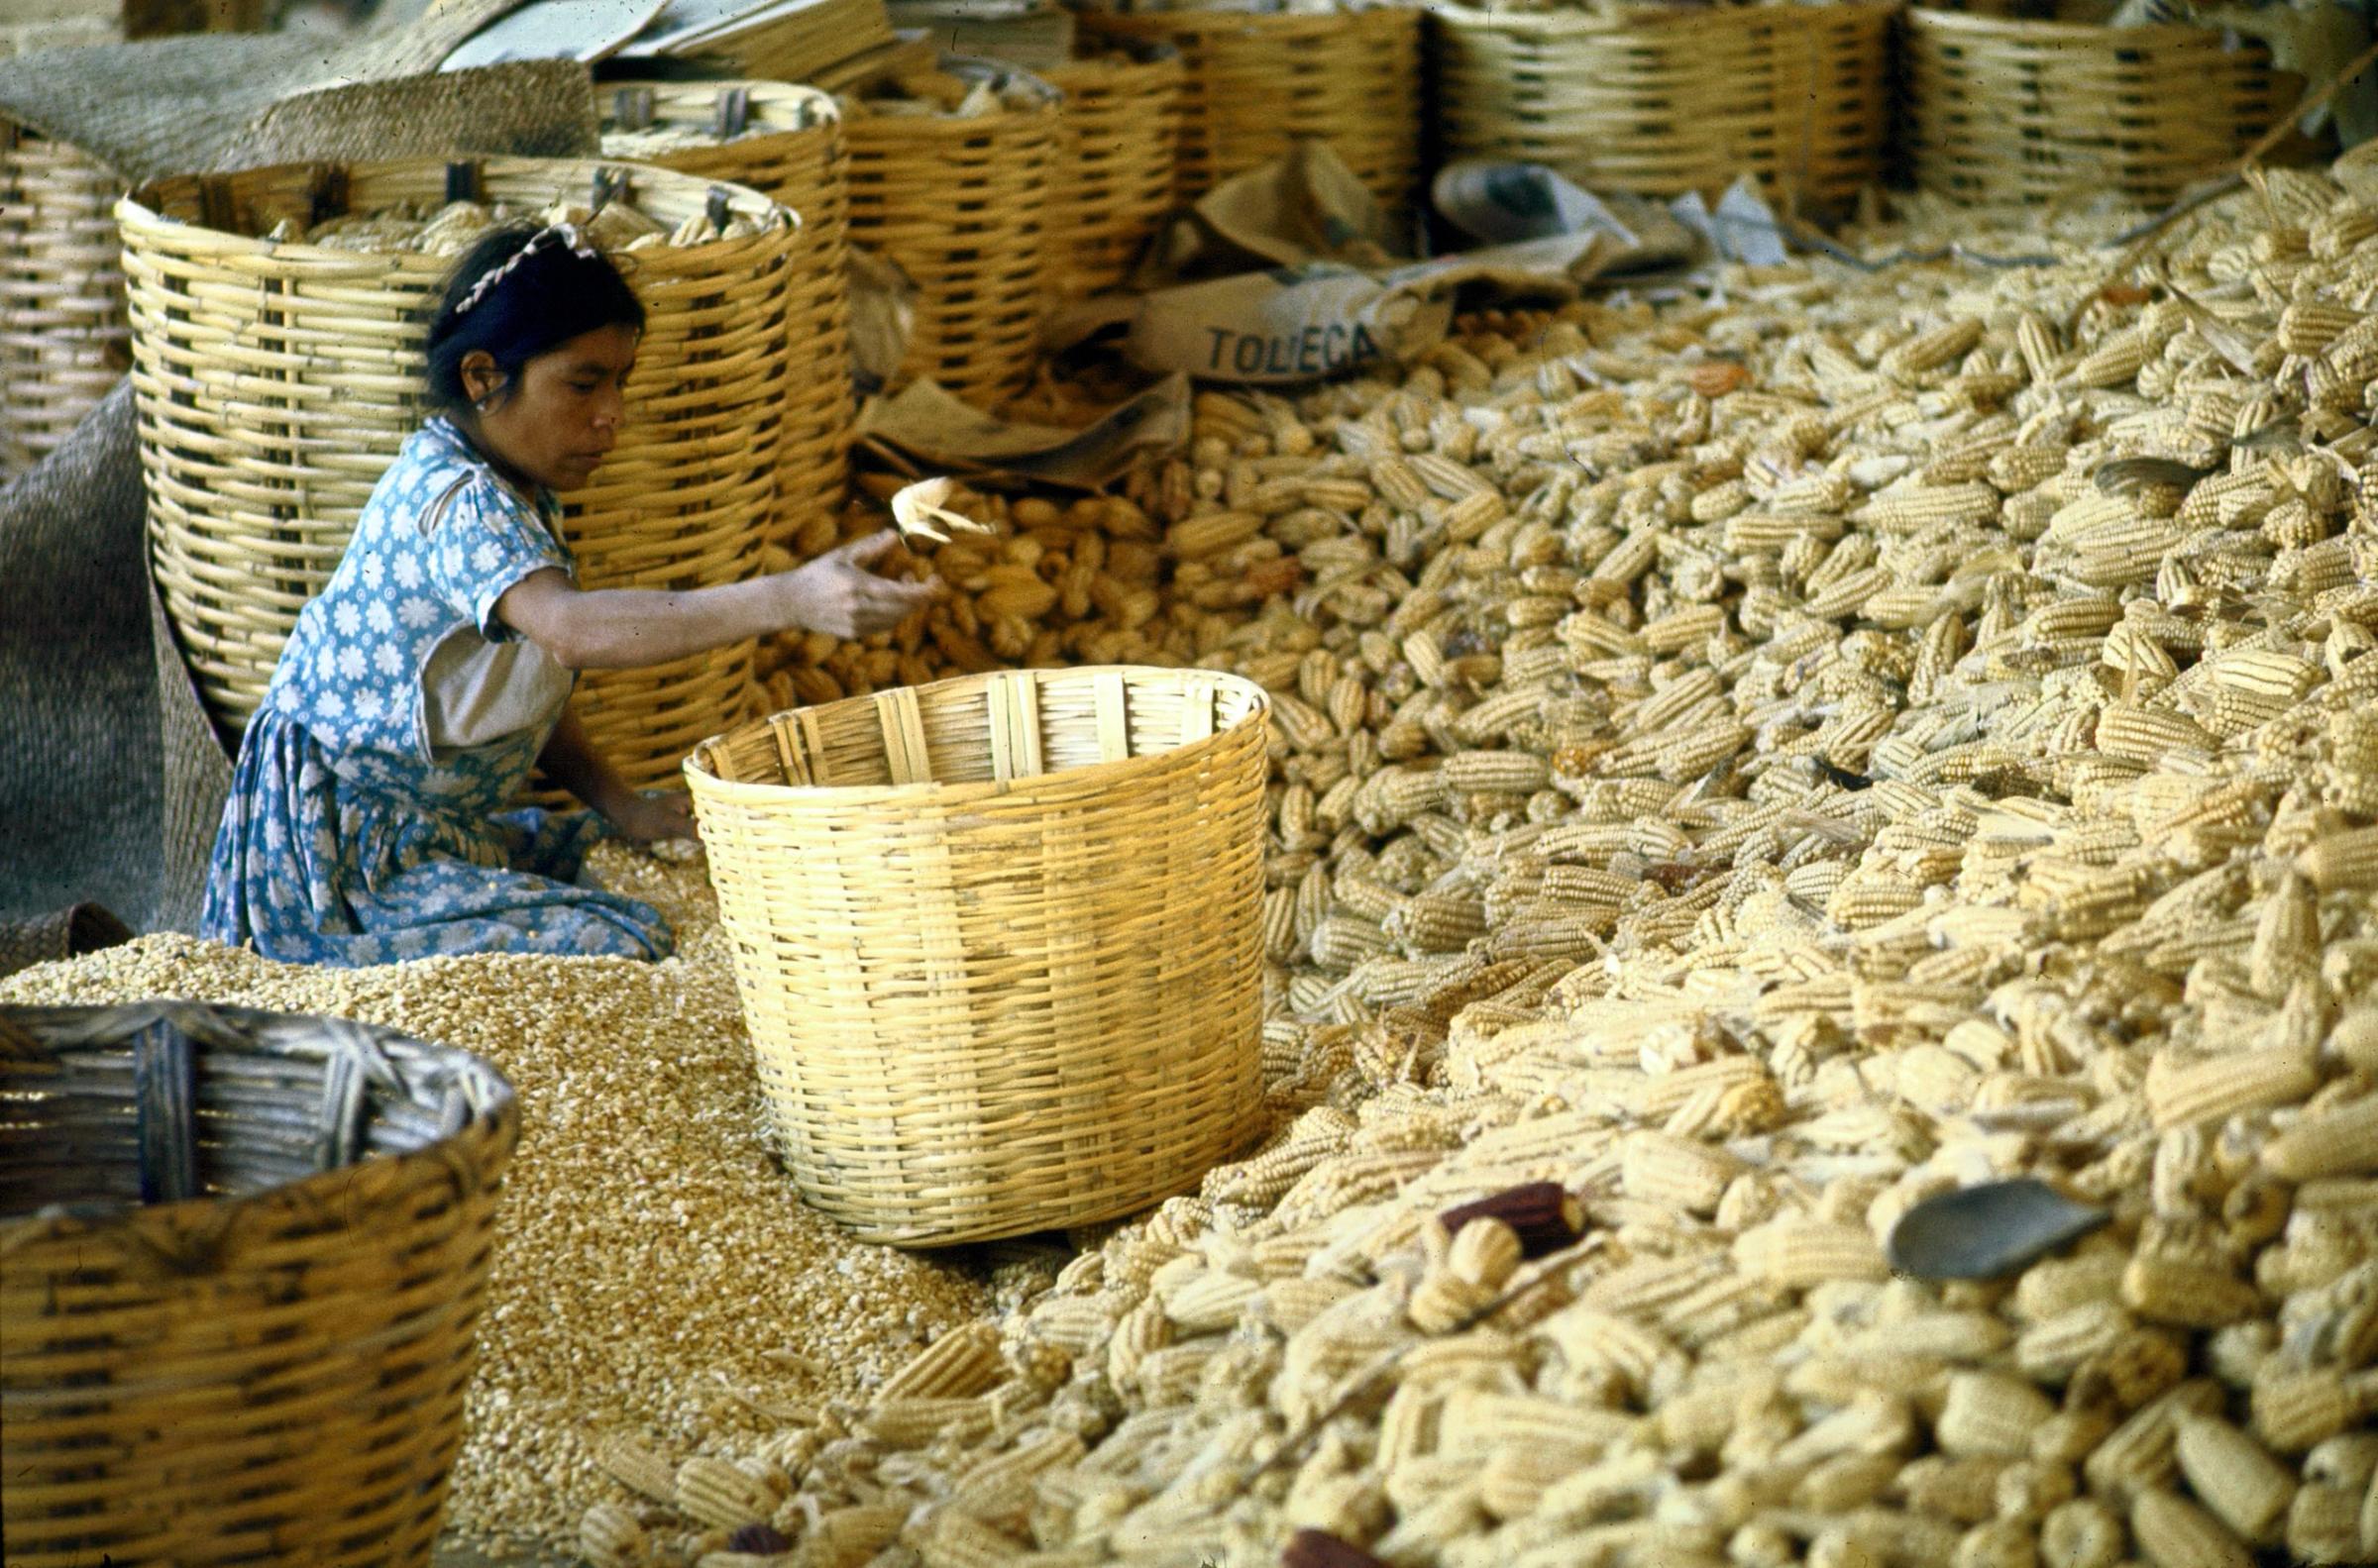 Woman shelling corn in wicker hampers at a local market, Mexico.